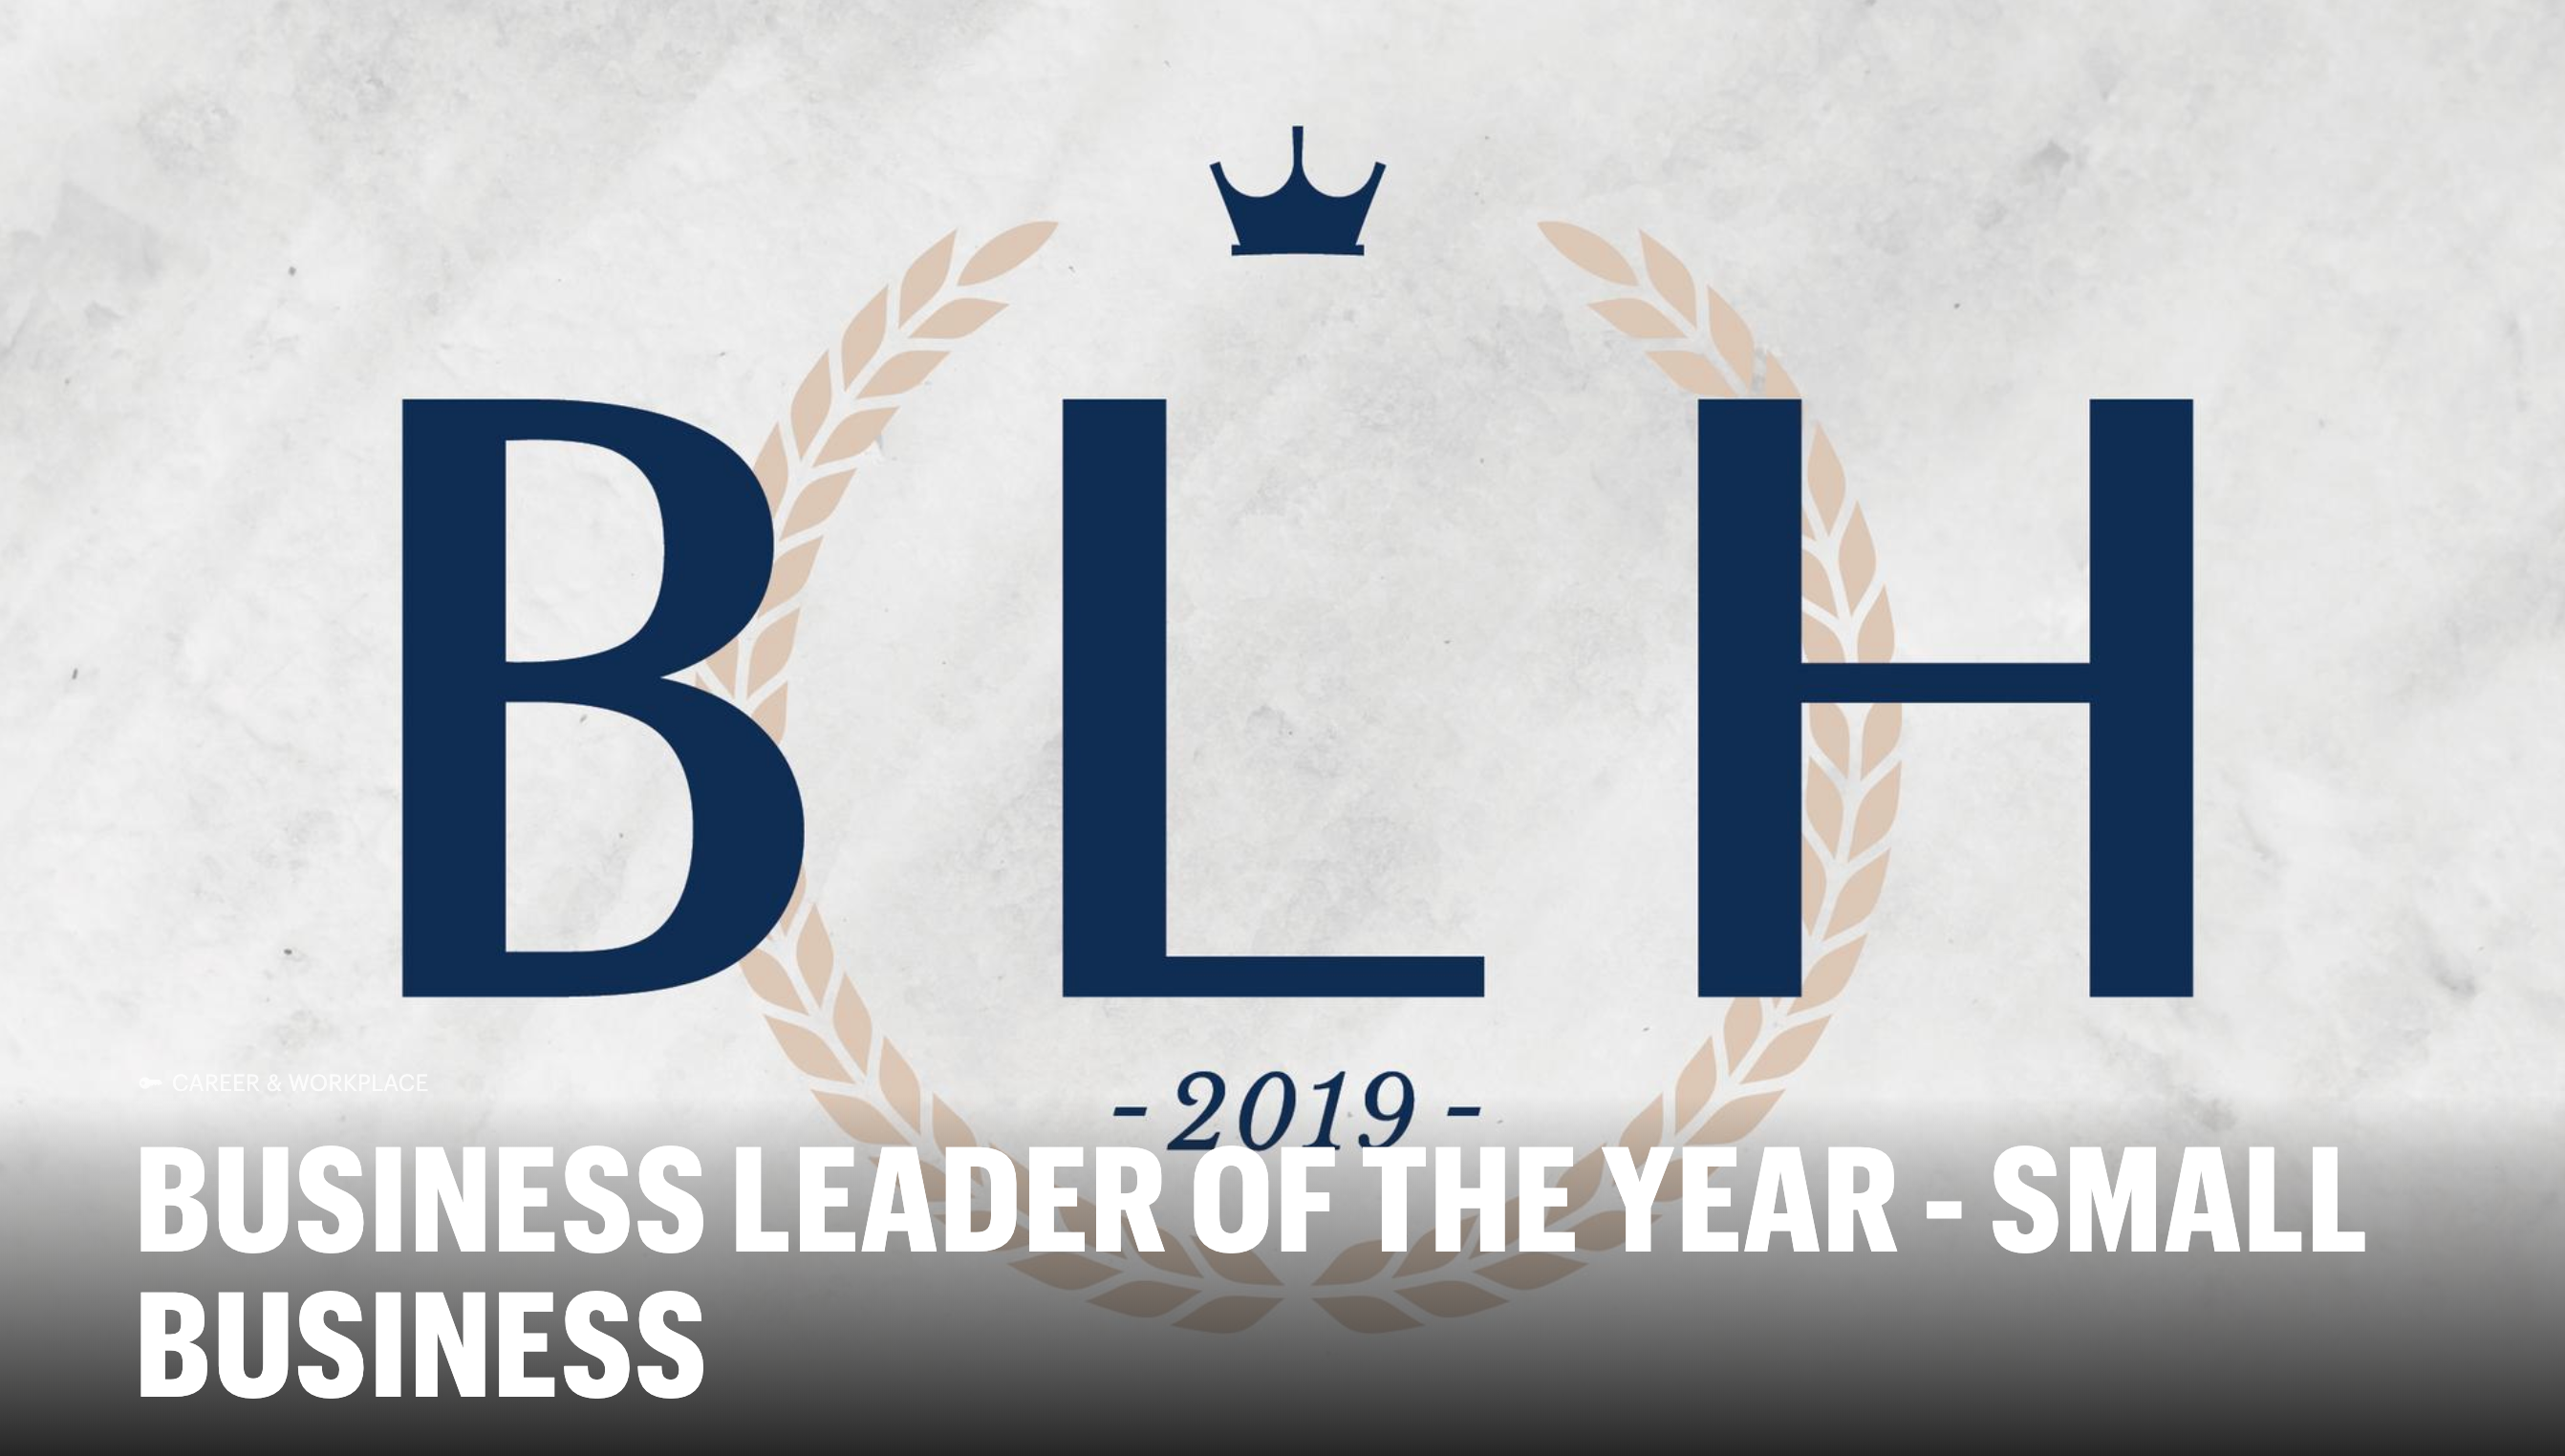 BUSINESS LEADER OF THE YEAR - SMALL BUSINESS